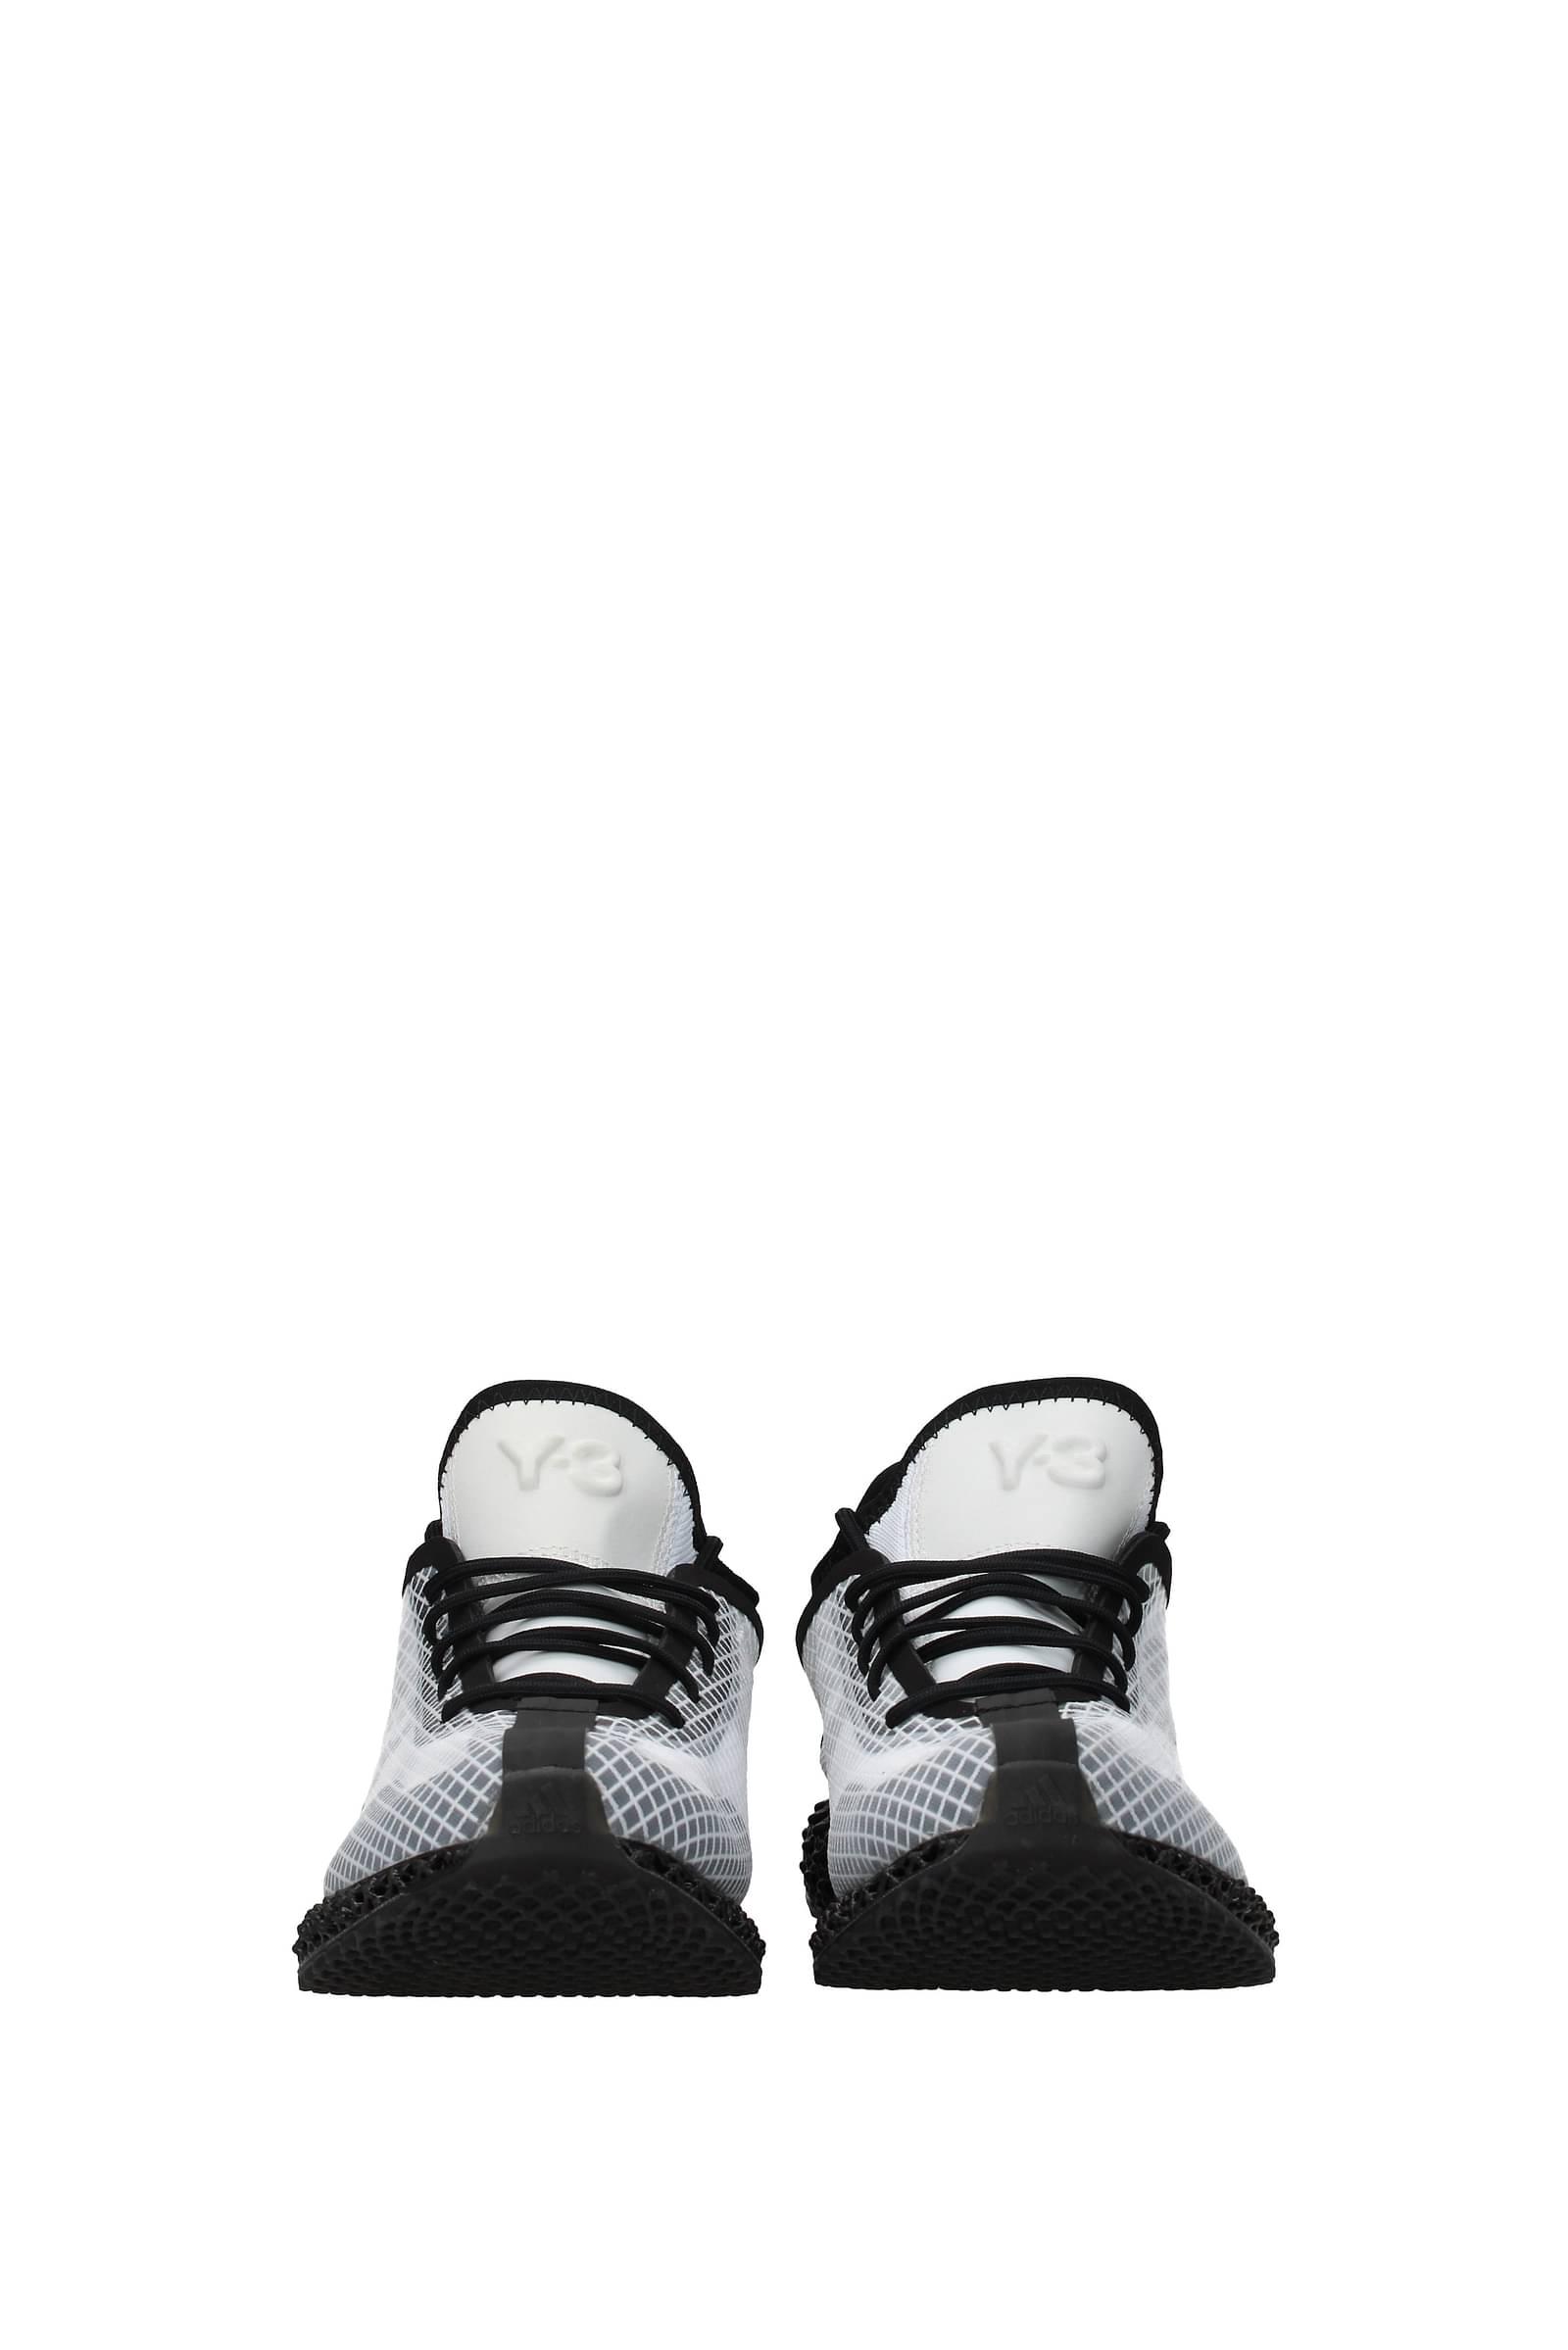 Y-3 Sneakers Adidas Runner Fabric White Black for Men | Lyst